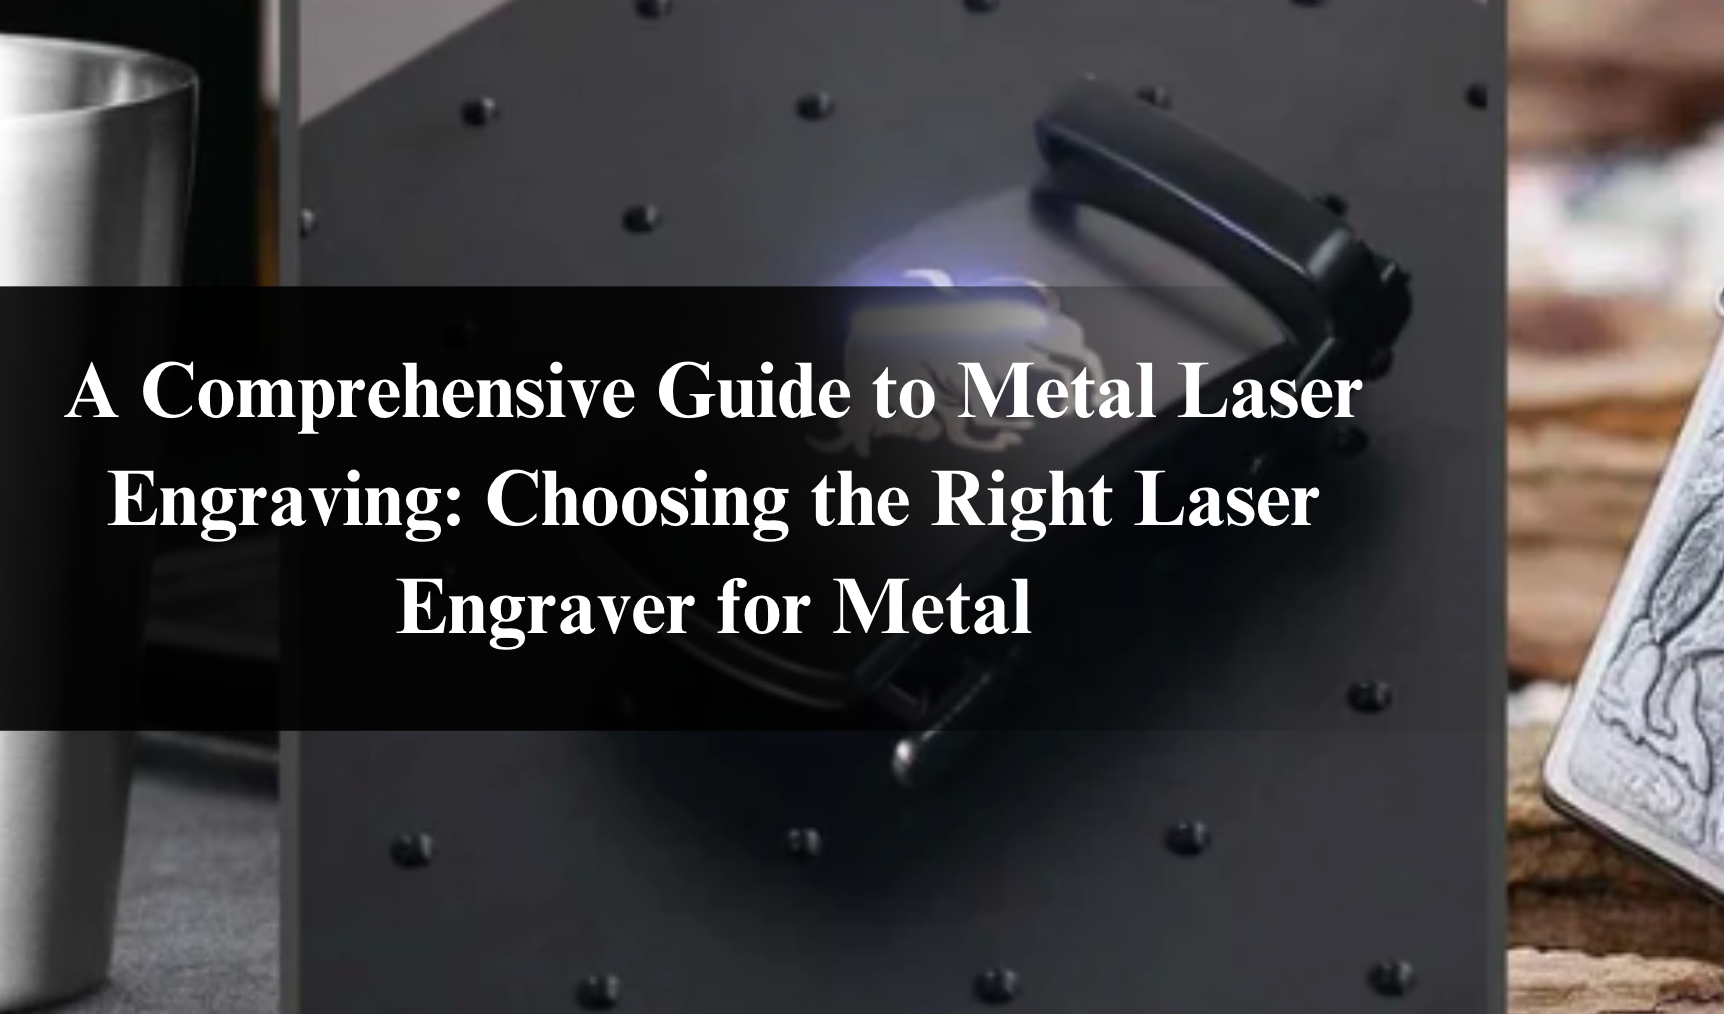 A Comprehensive Guide to Metal Laser Engraving: Choosing the Right Laser Engraver for Metal